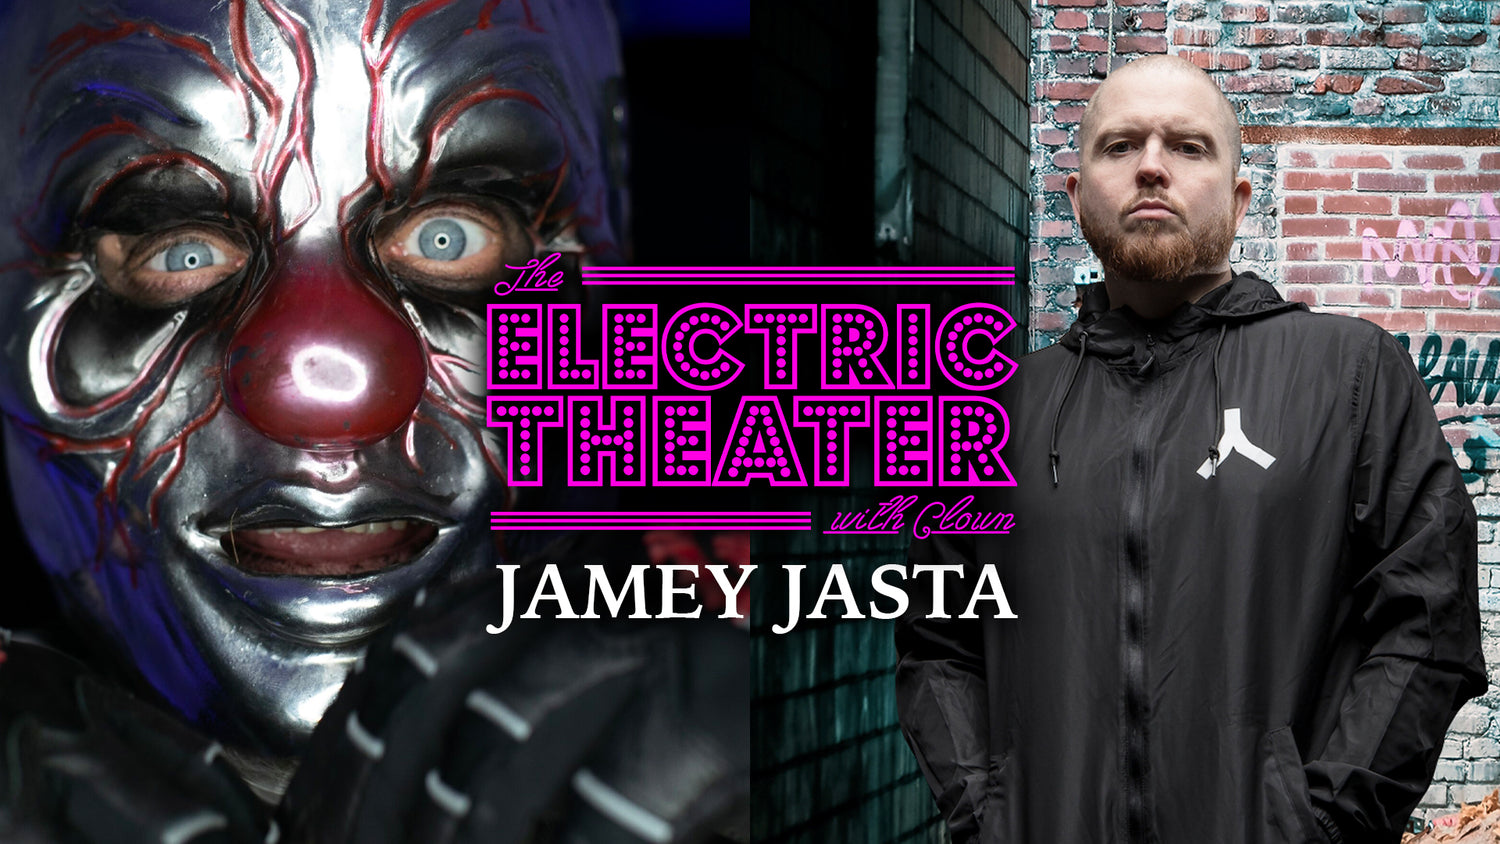 Jamey Jasta guests on clown's Electric Theater to talk changing perspective and evolving priorities as a result of the pandemic